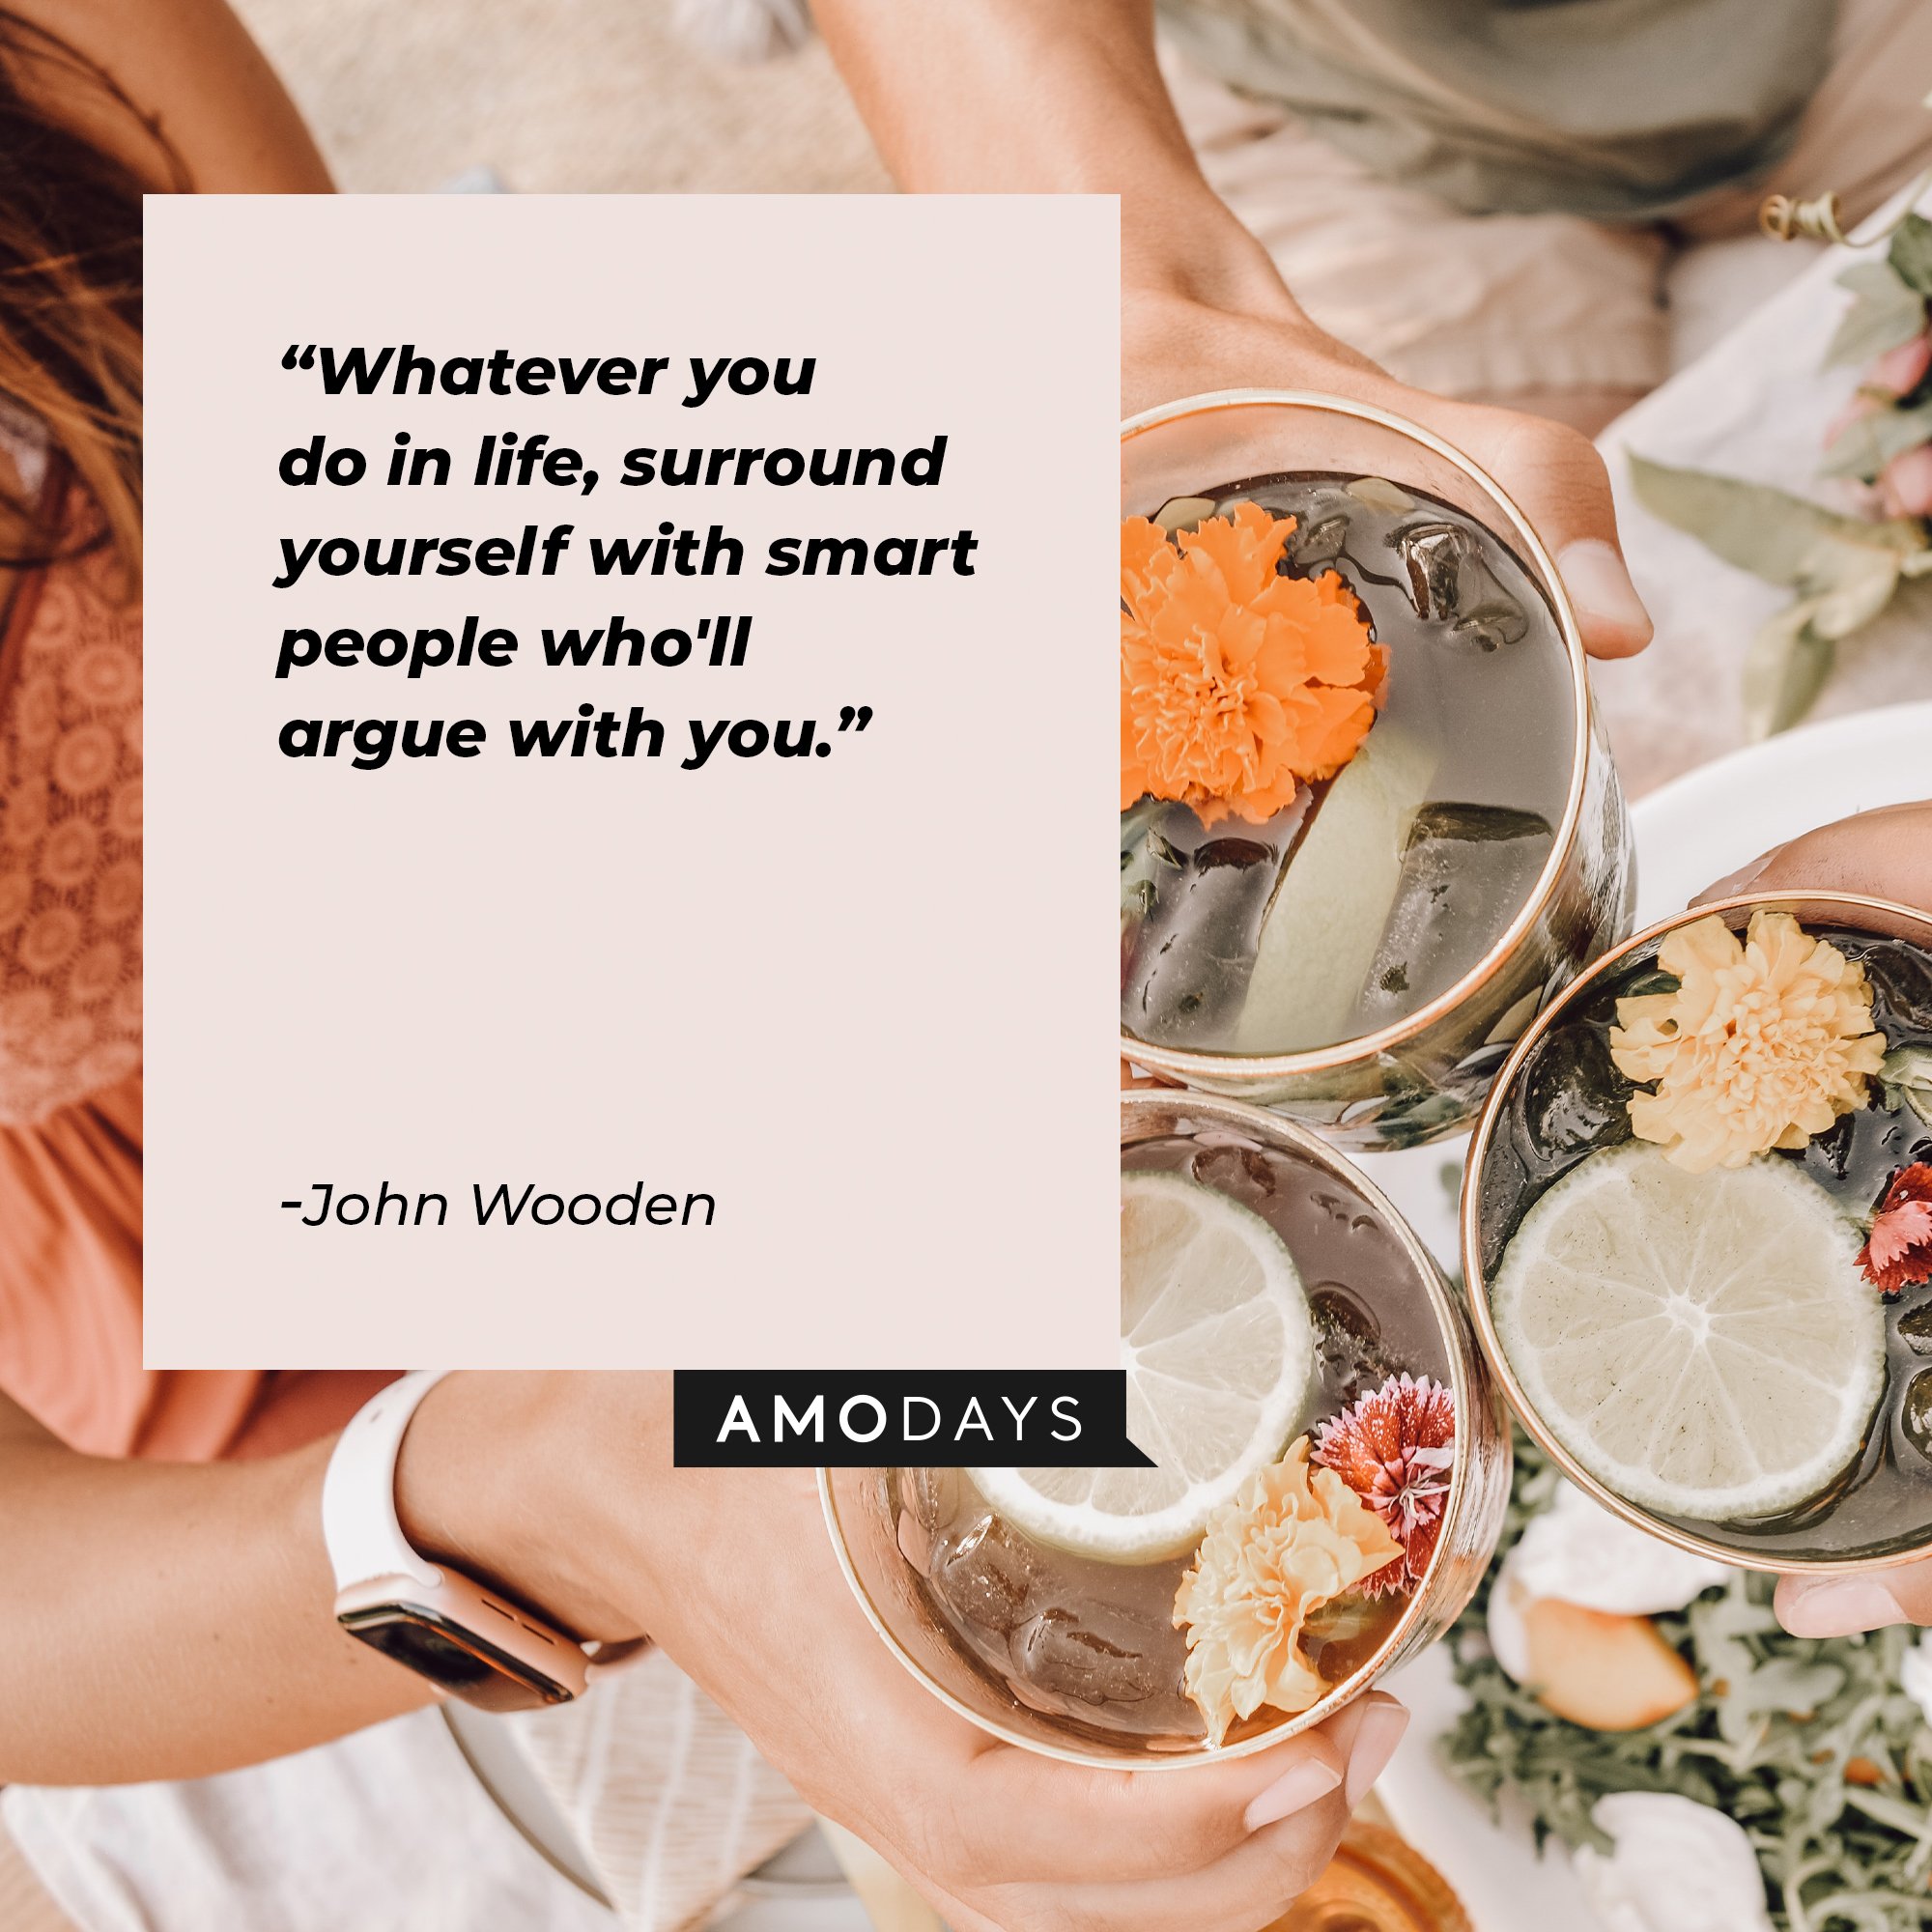 John Wooden’s quote: “Whatever you do in life, surround yourself with smart people who'll argue with you.” | Image: AmoDays 